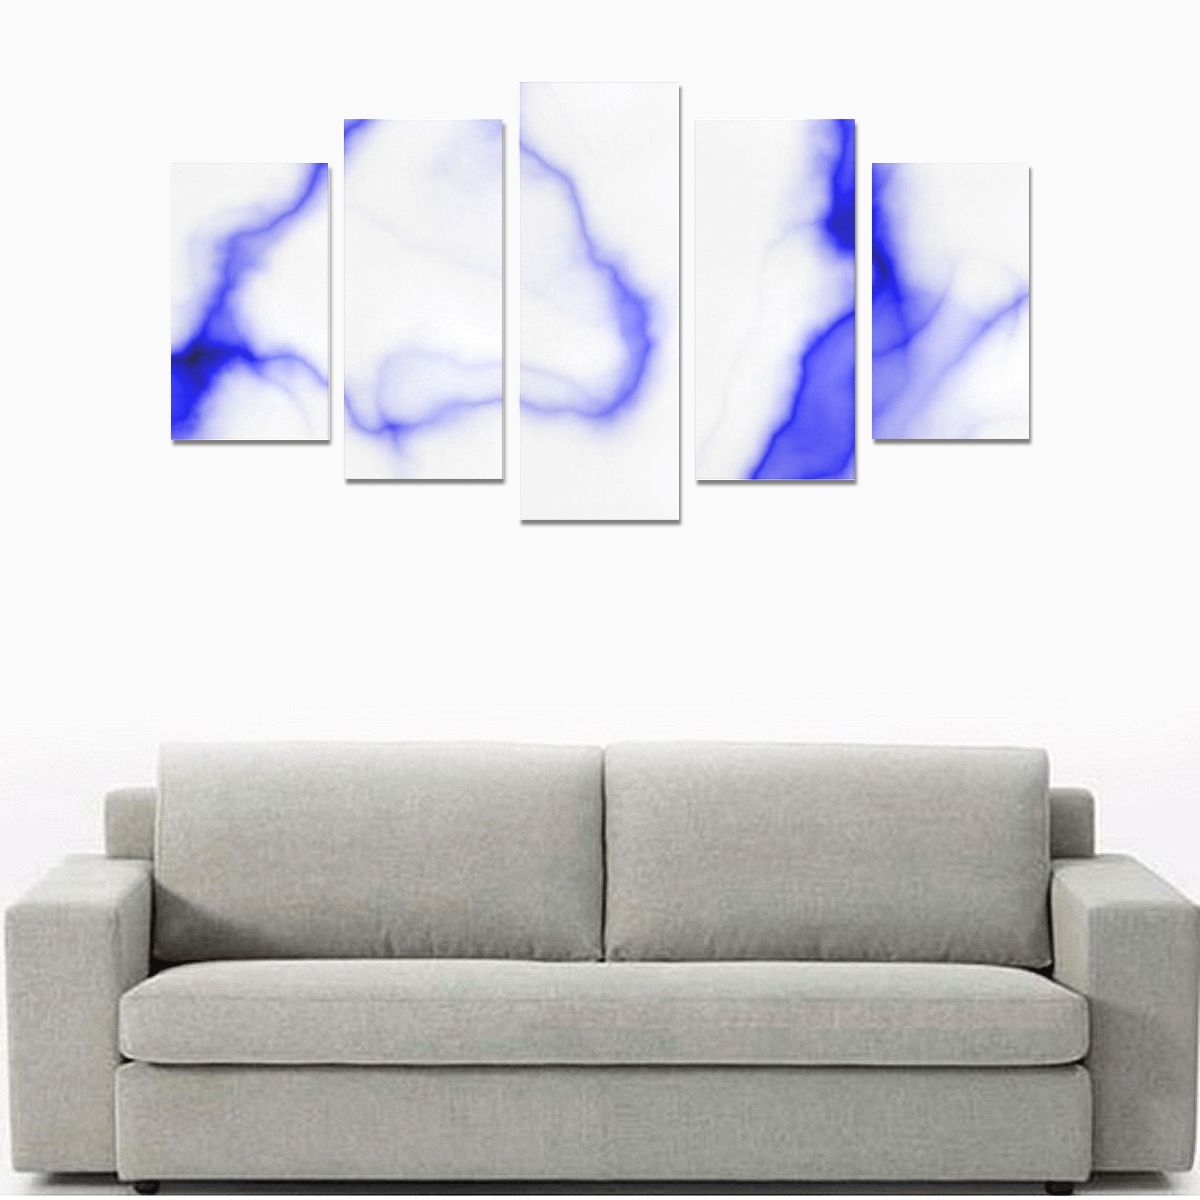 abstract light F Canvas Print Sets A (No Frame)